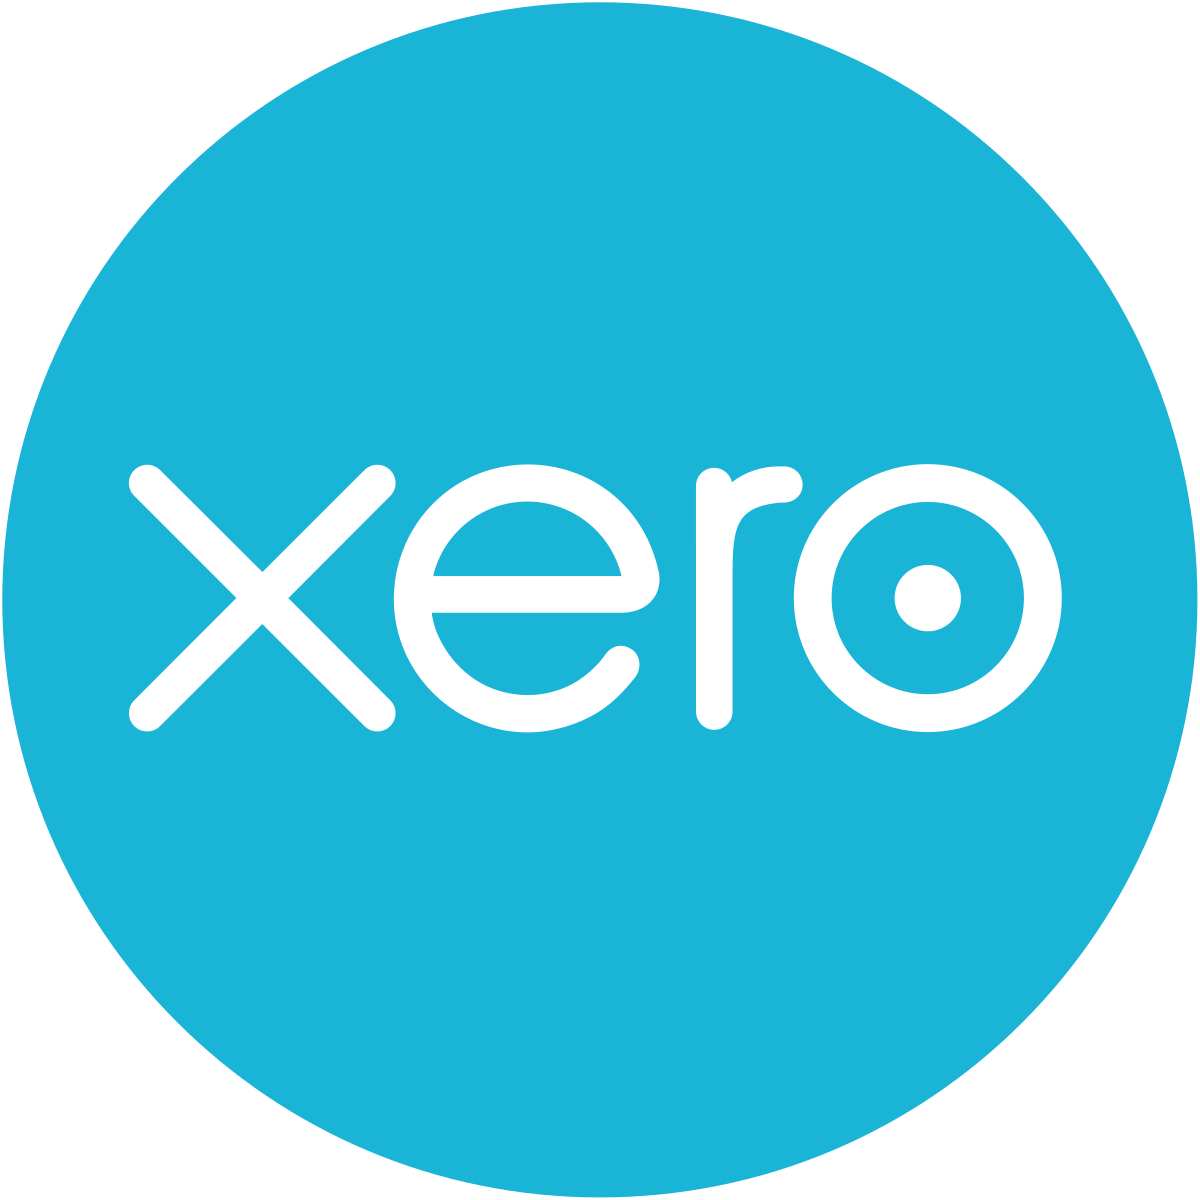 How to manage your business accounts with Xero.